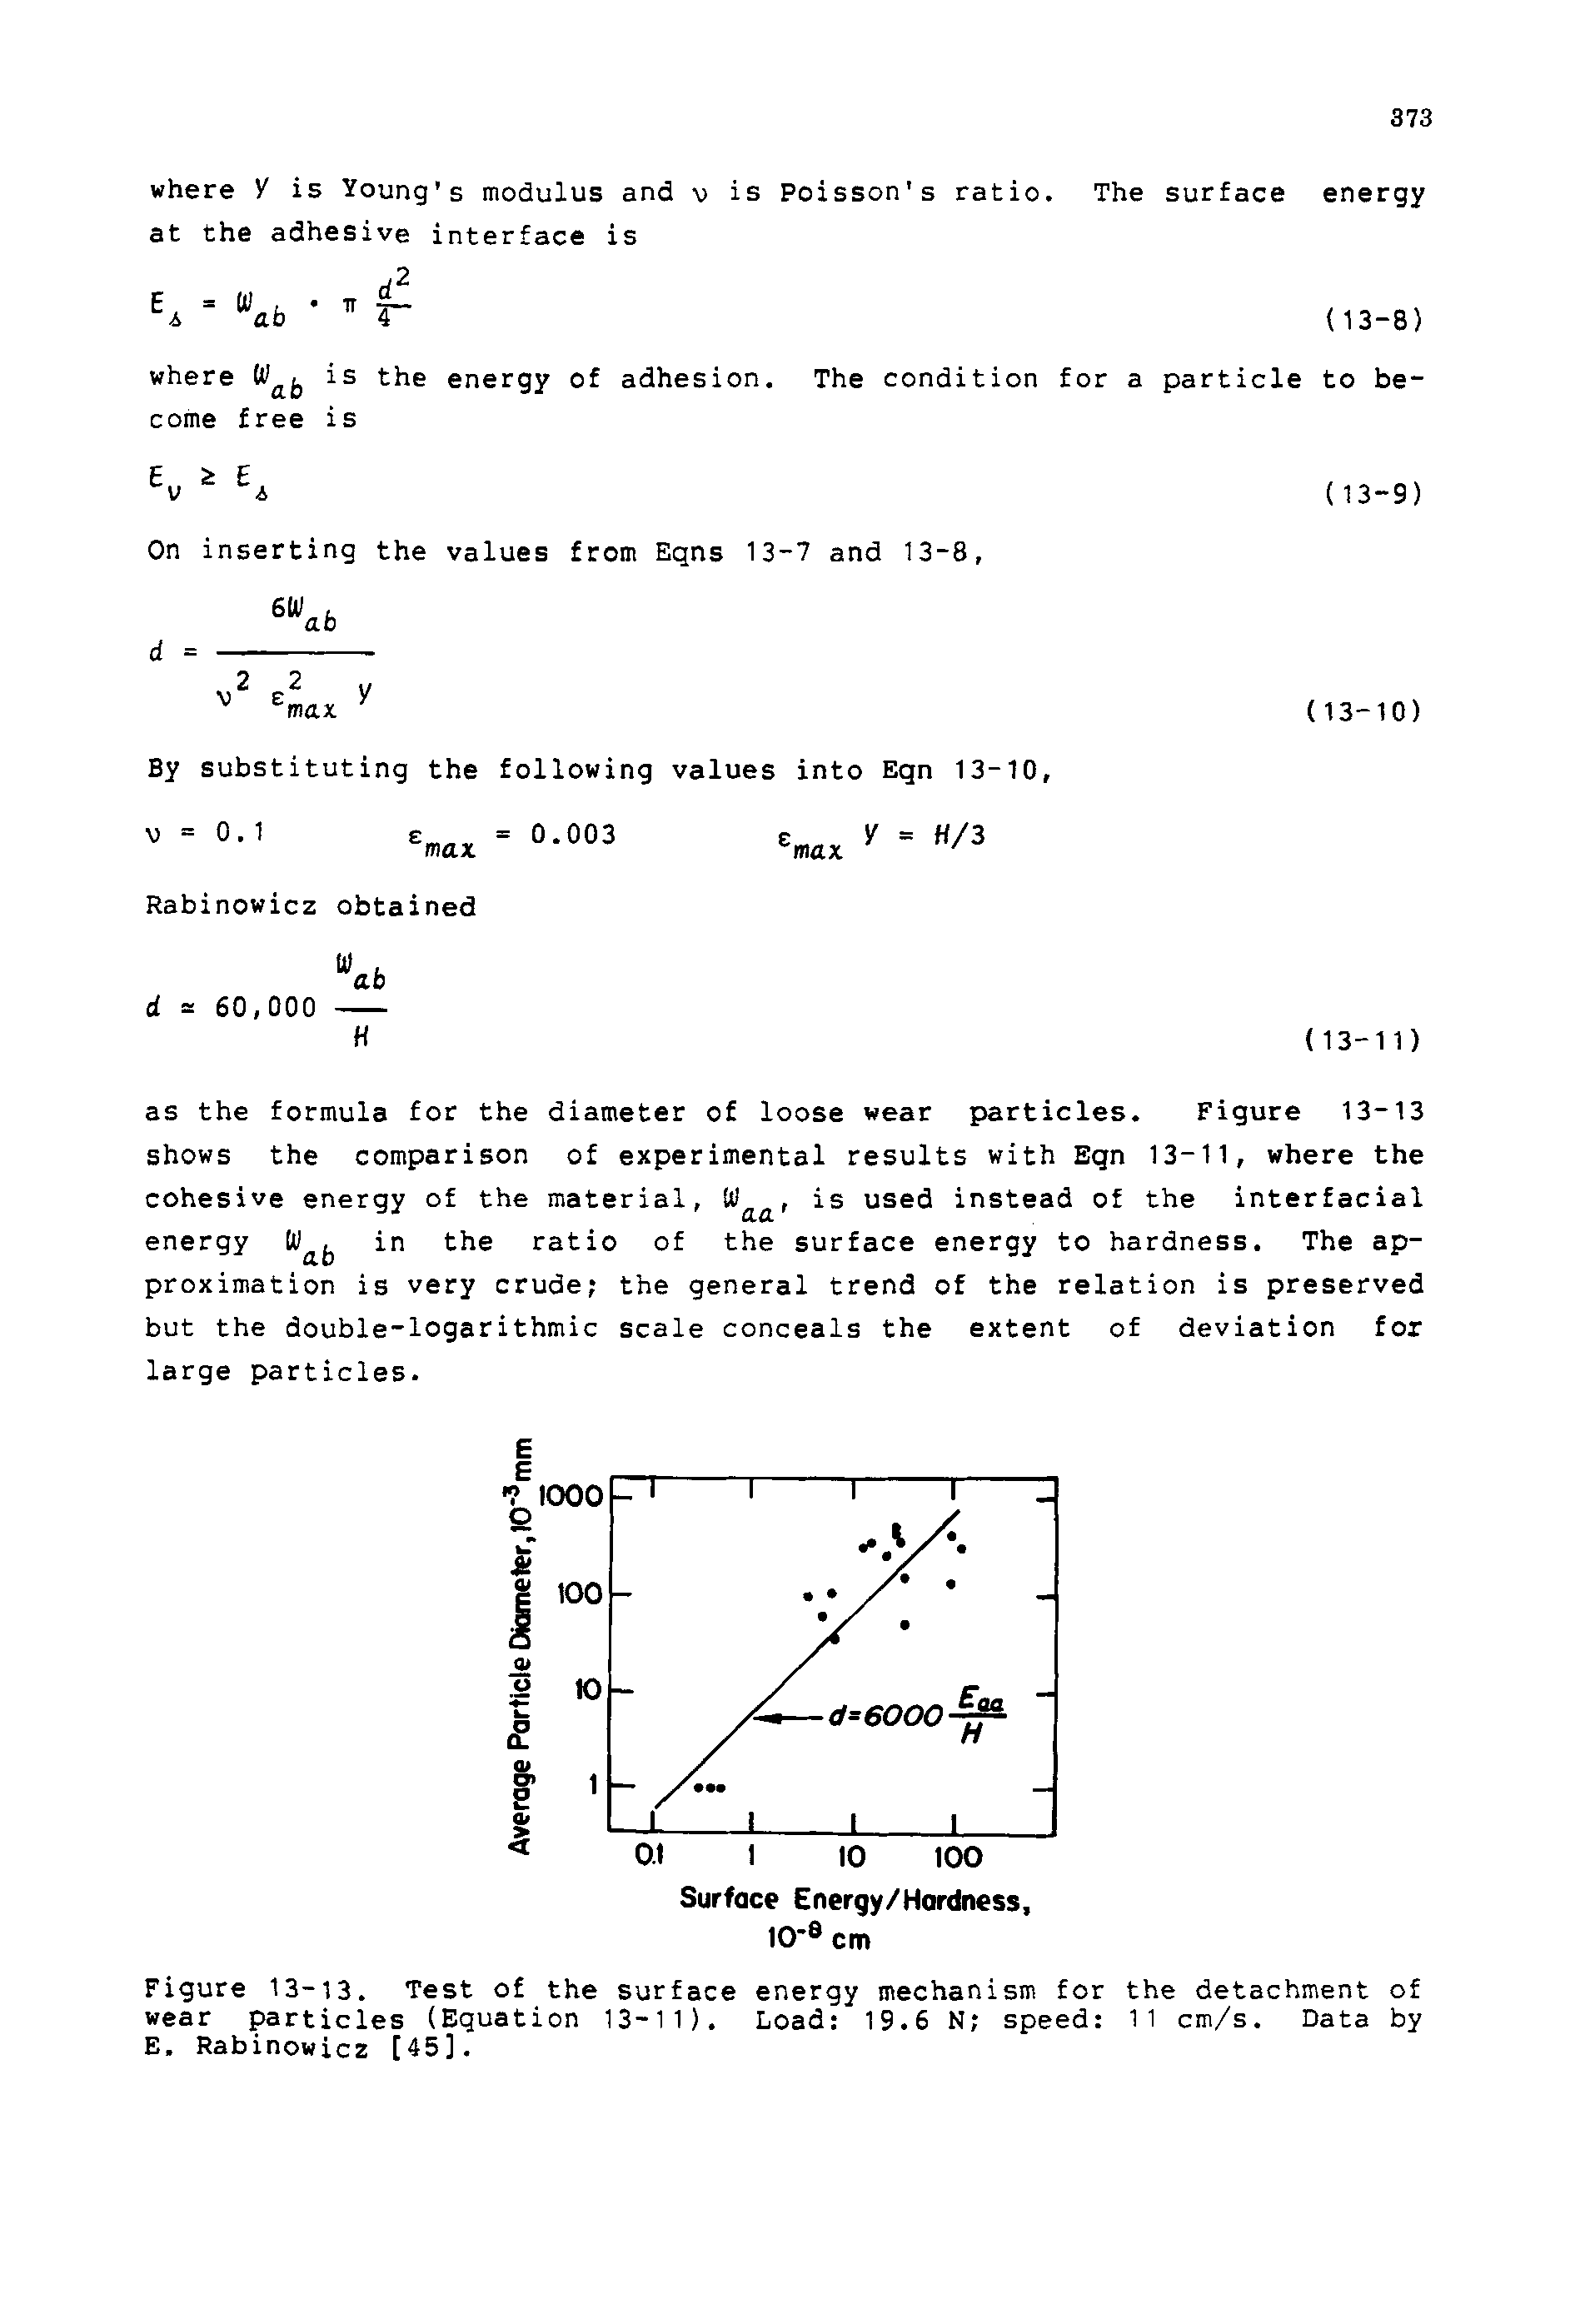 Figure 13-13. Test of the surface energy mechanism for the detachment of wear particles (Equation 13-11). Load 19.6 N speed 11 cm/s. Data by E. Rabinowicz [45].